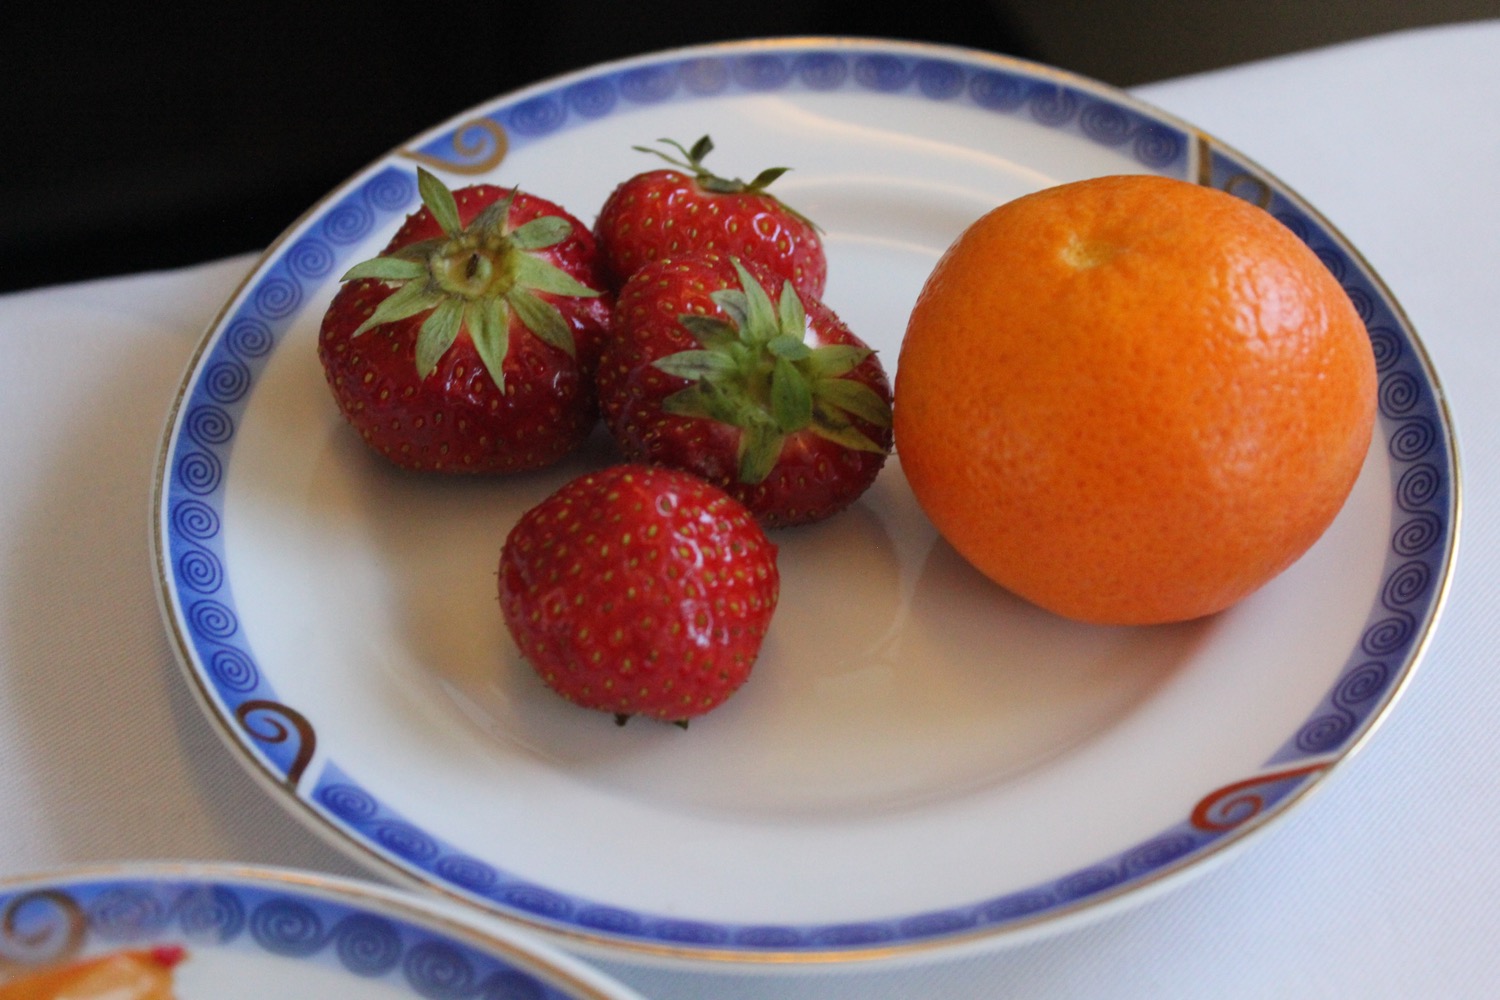 a plate of strawberries and an orange